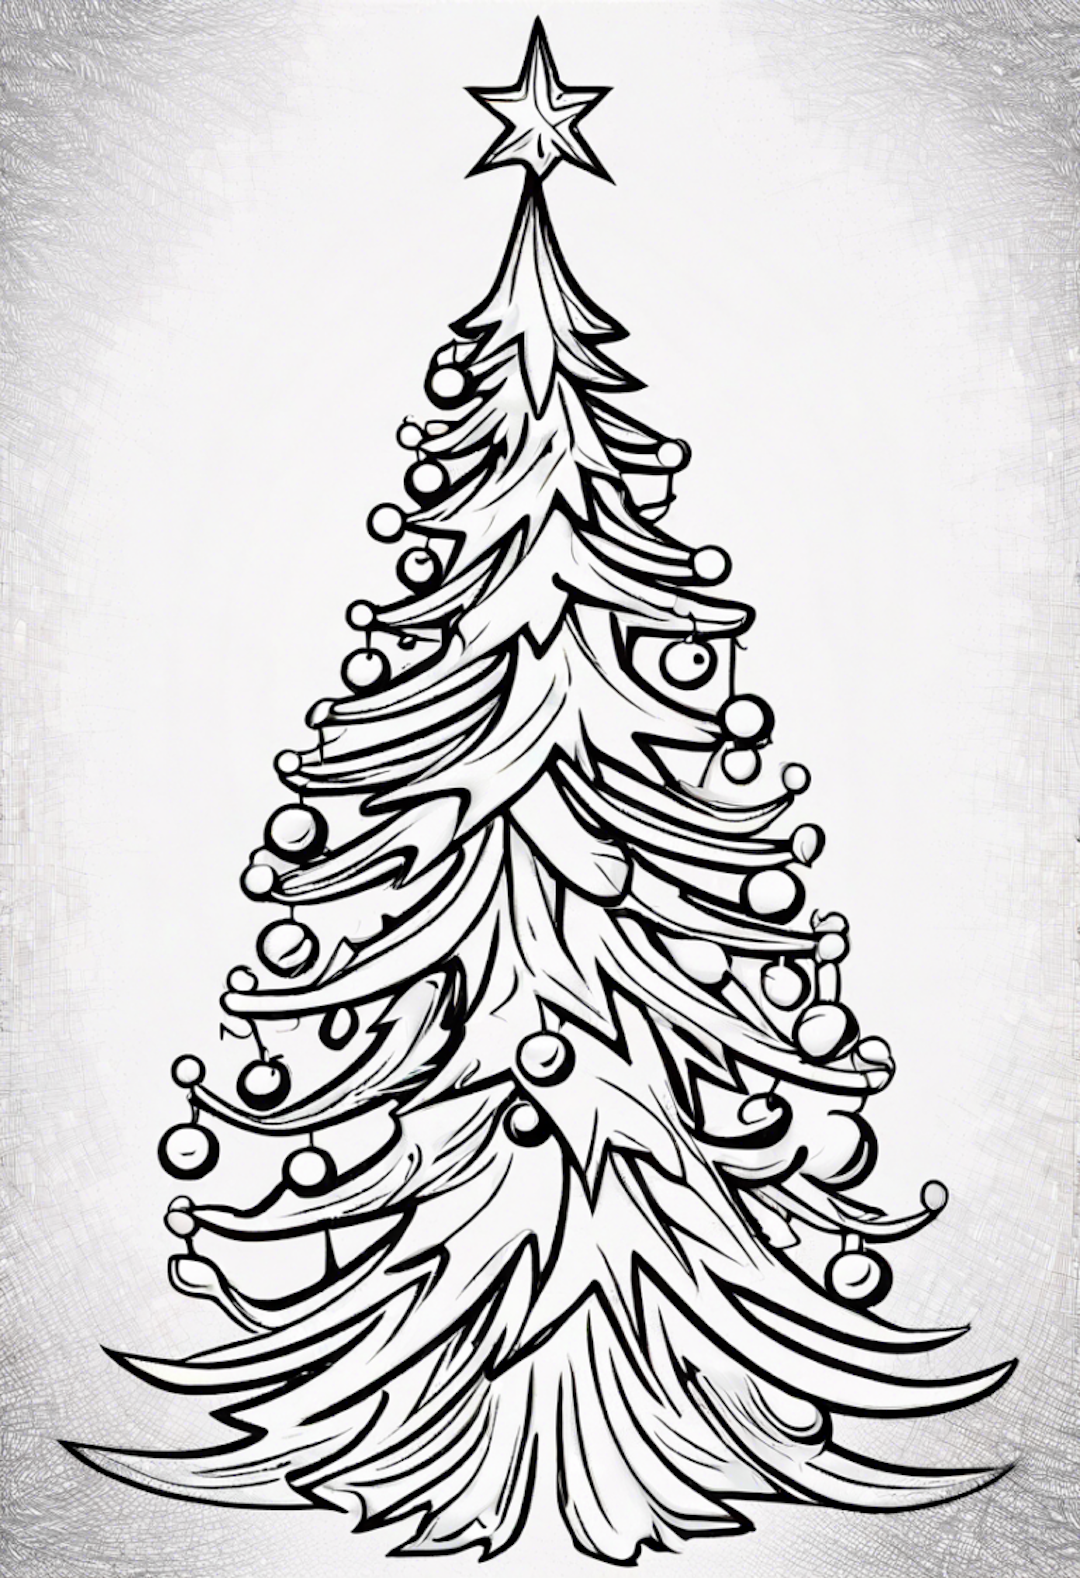 Festive Christmas Tree coloring pages